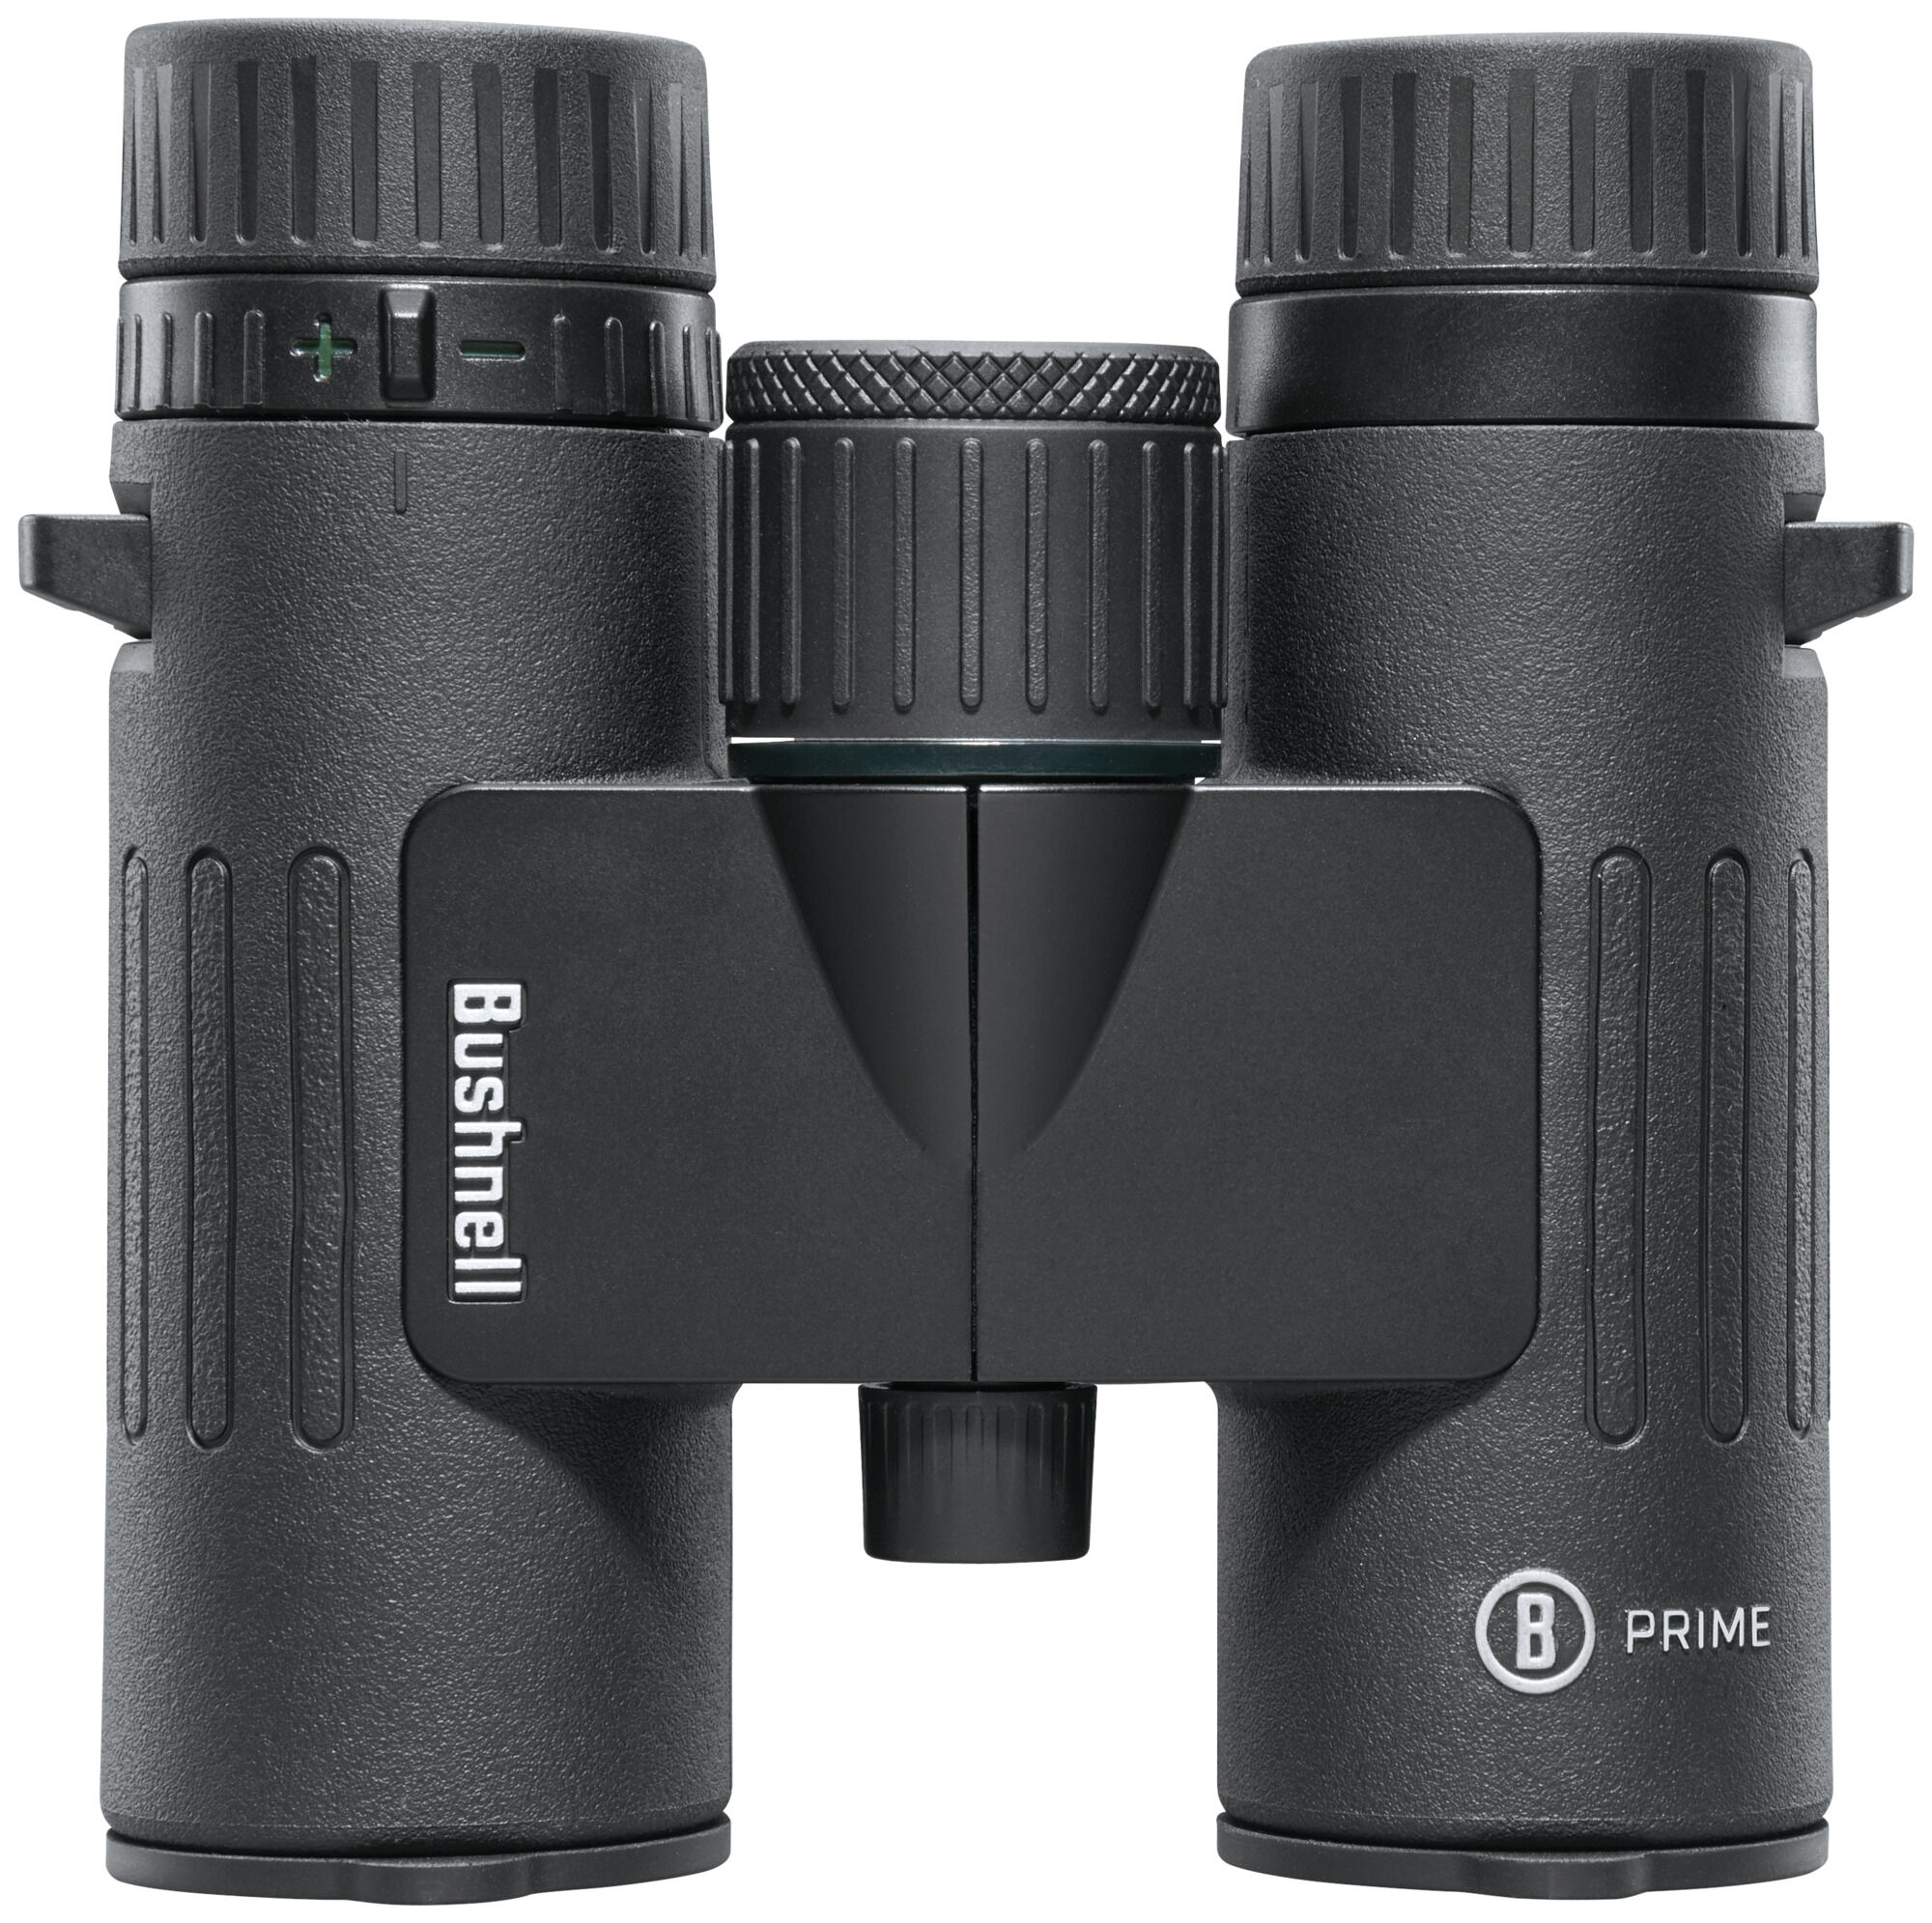 Prime Compact, Hunting Binoculars 10x28 Magnification | Bushnell